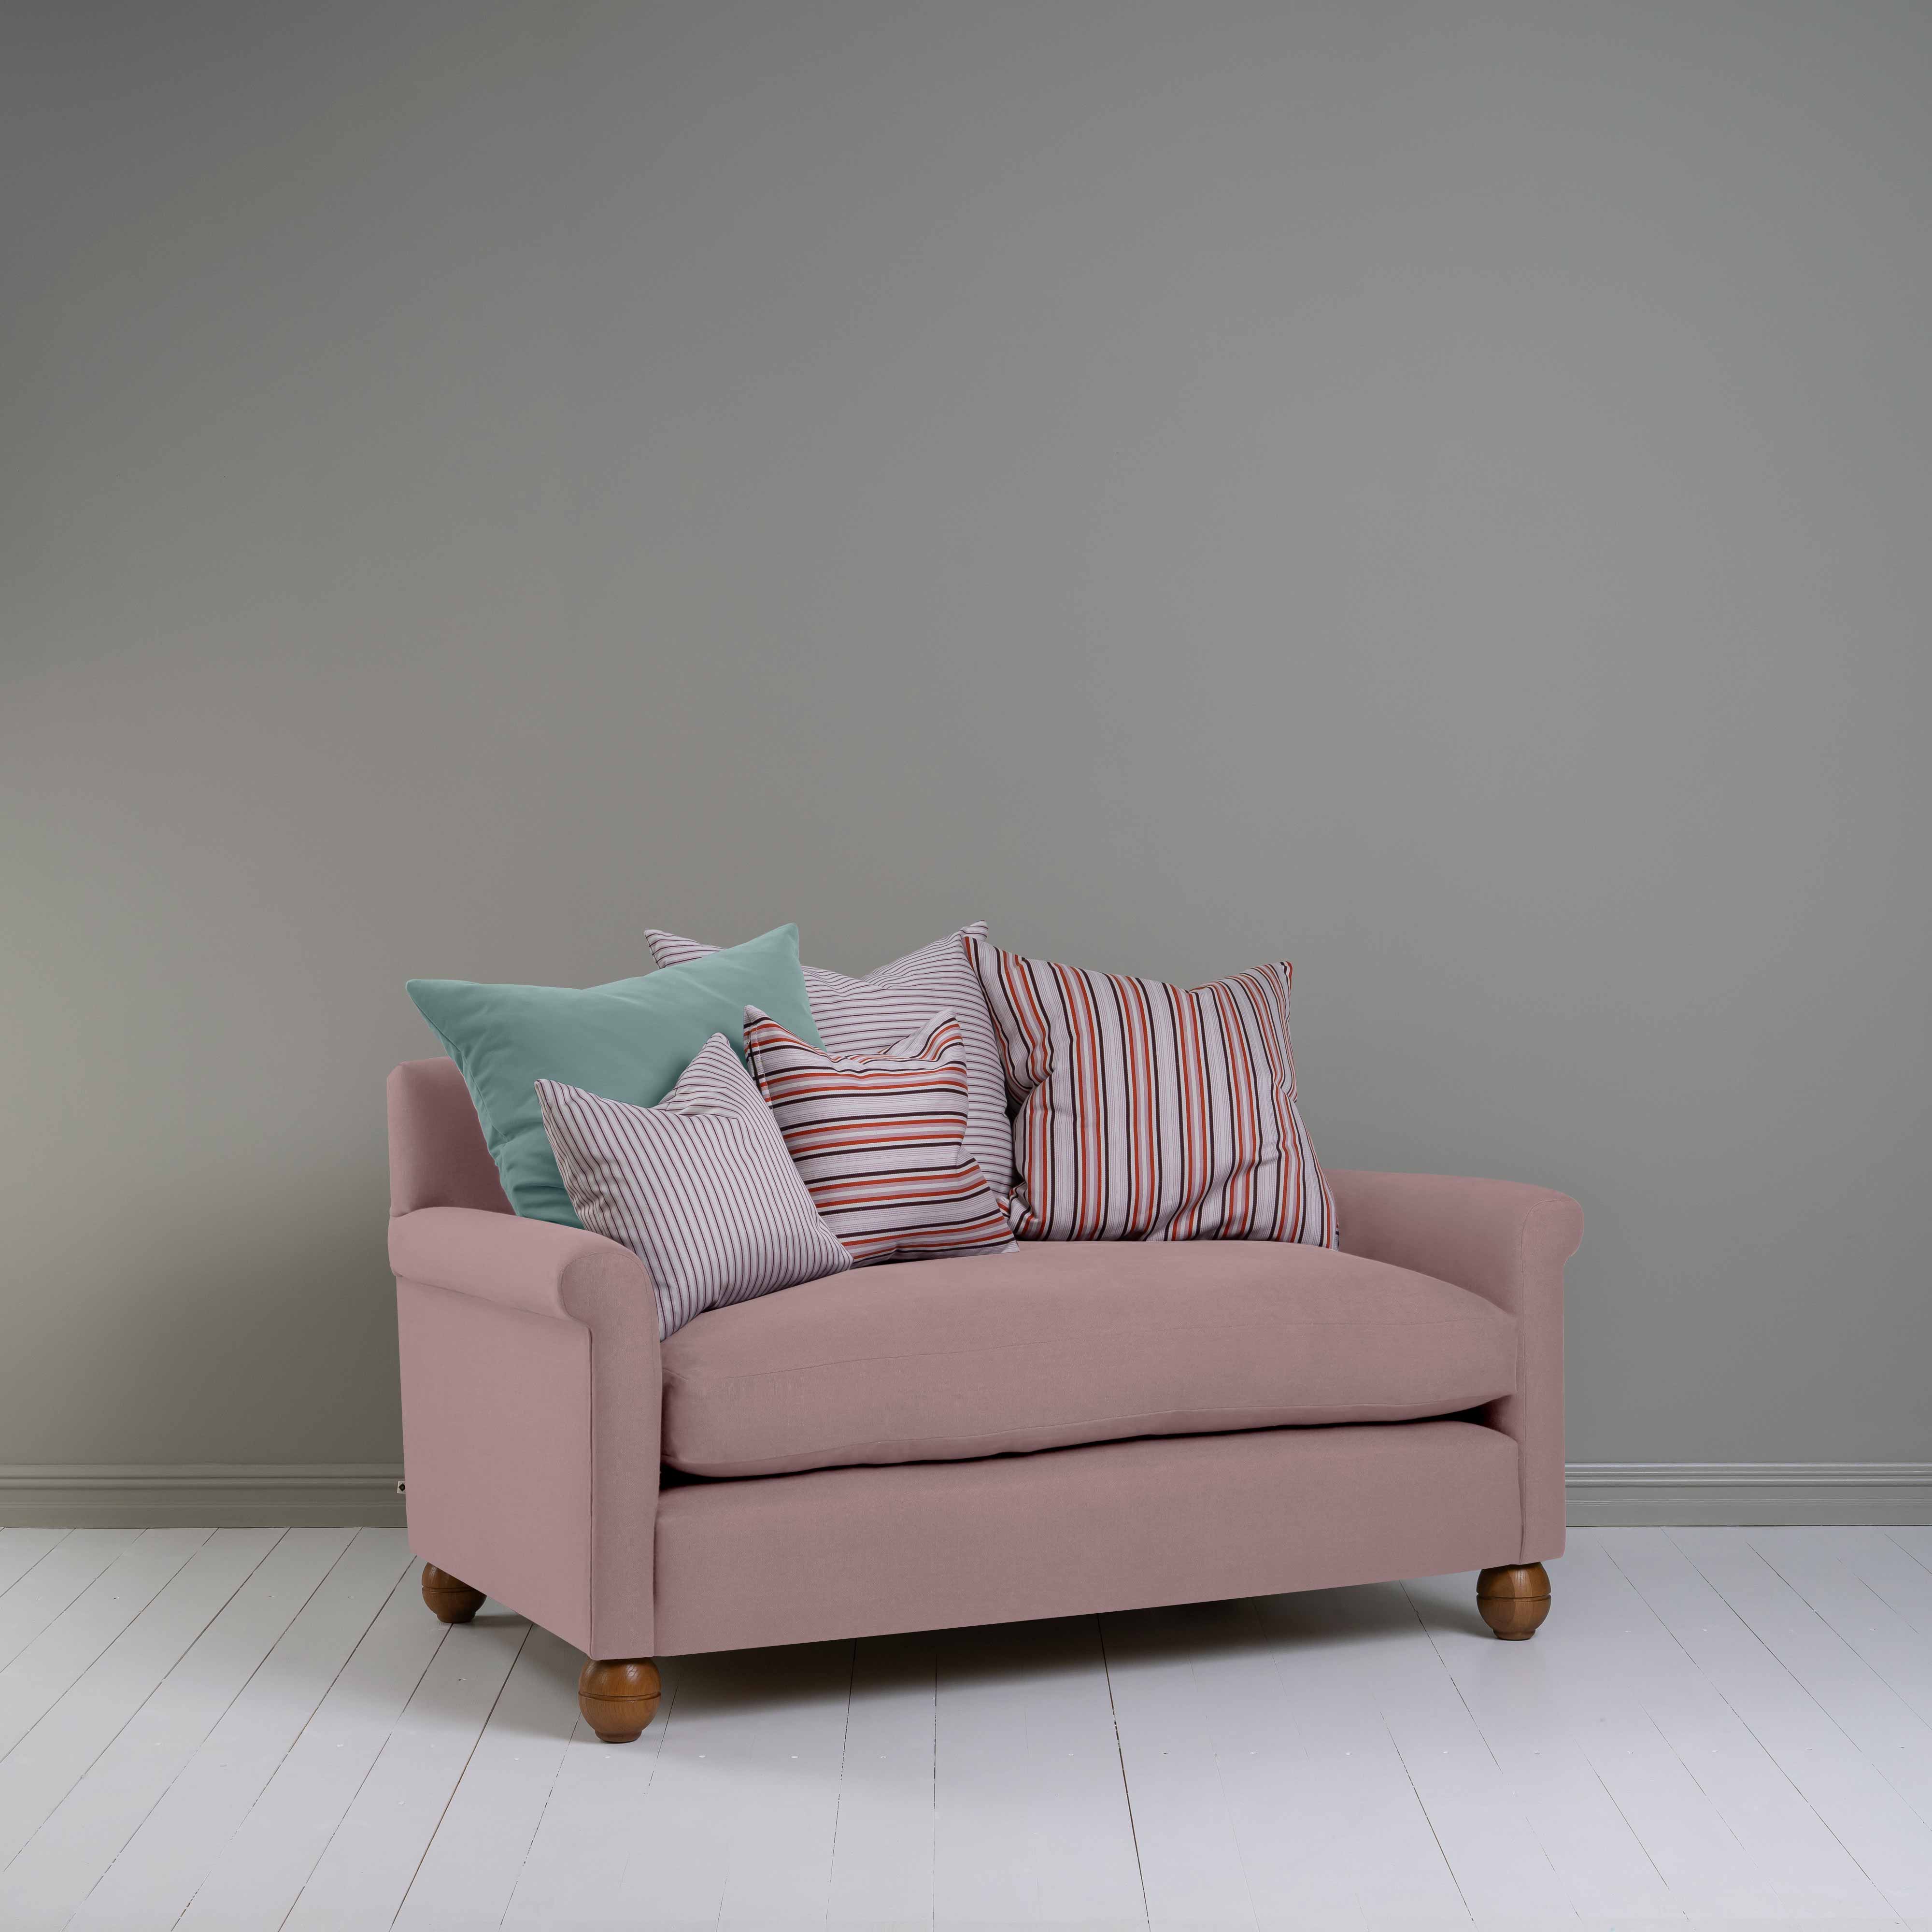  Idler 2 Seater Sofa in Laidback Linen Heather 